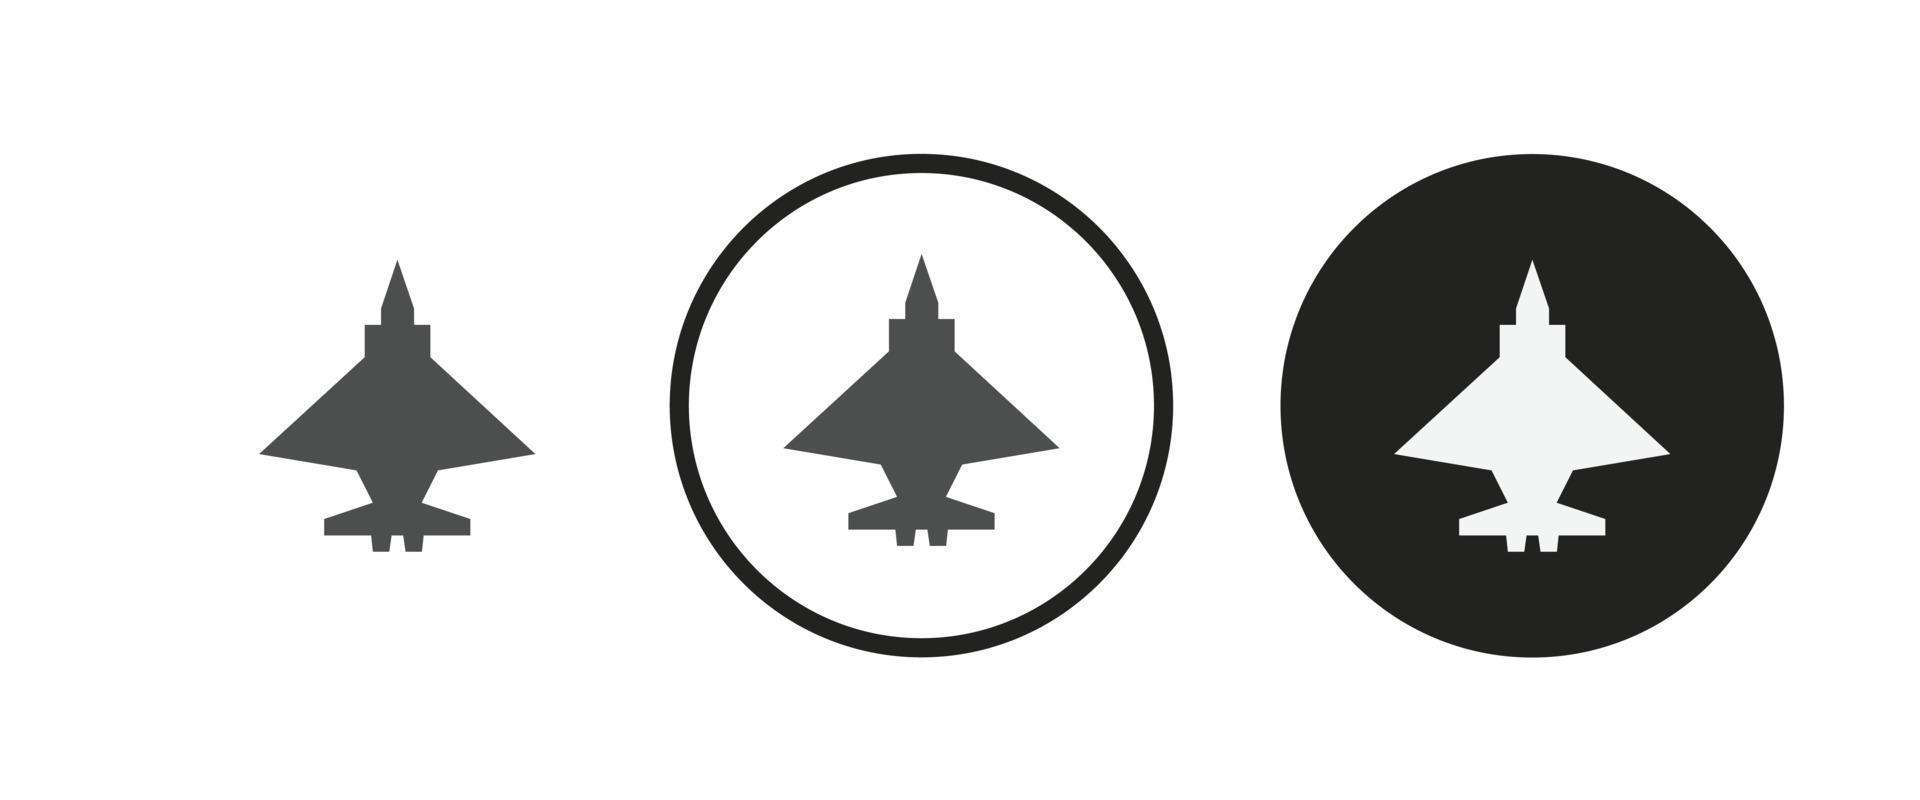 Spy plane icon . web icon set . icons collection flat. Simple vector illustration.